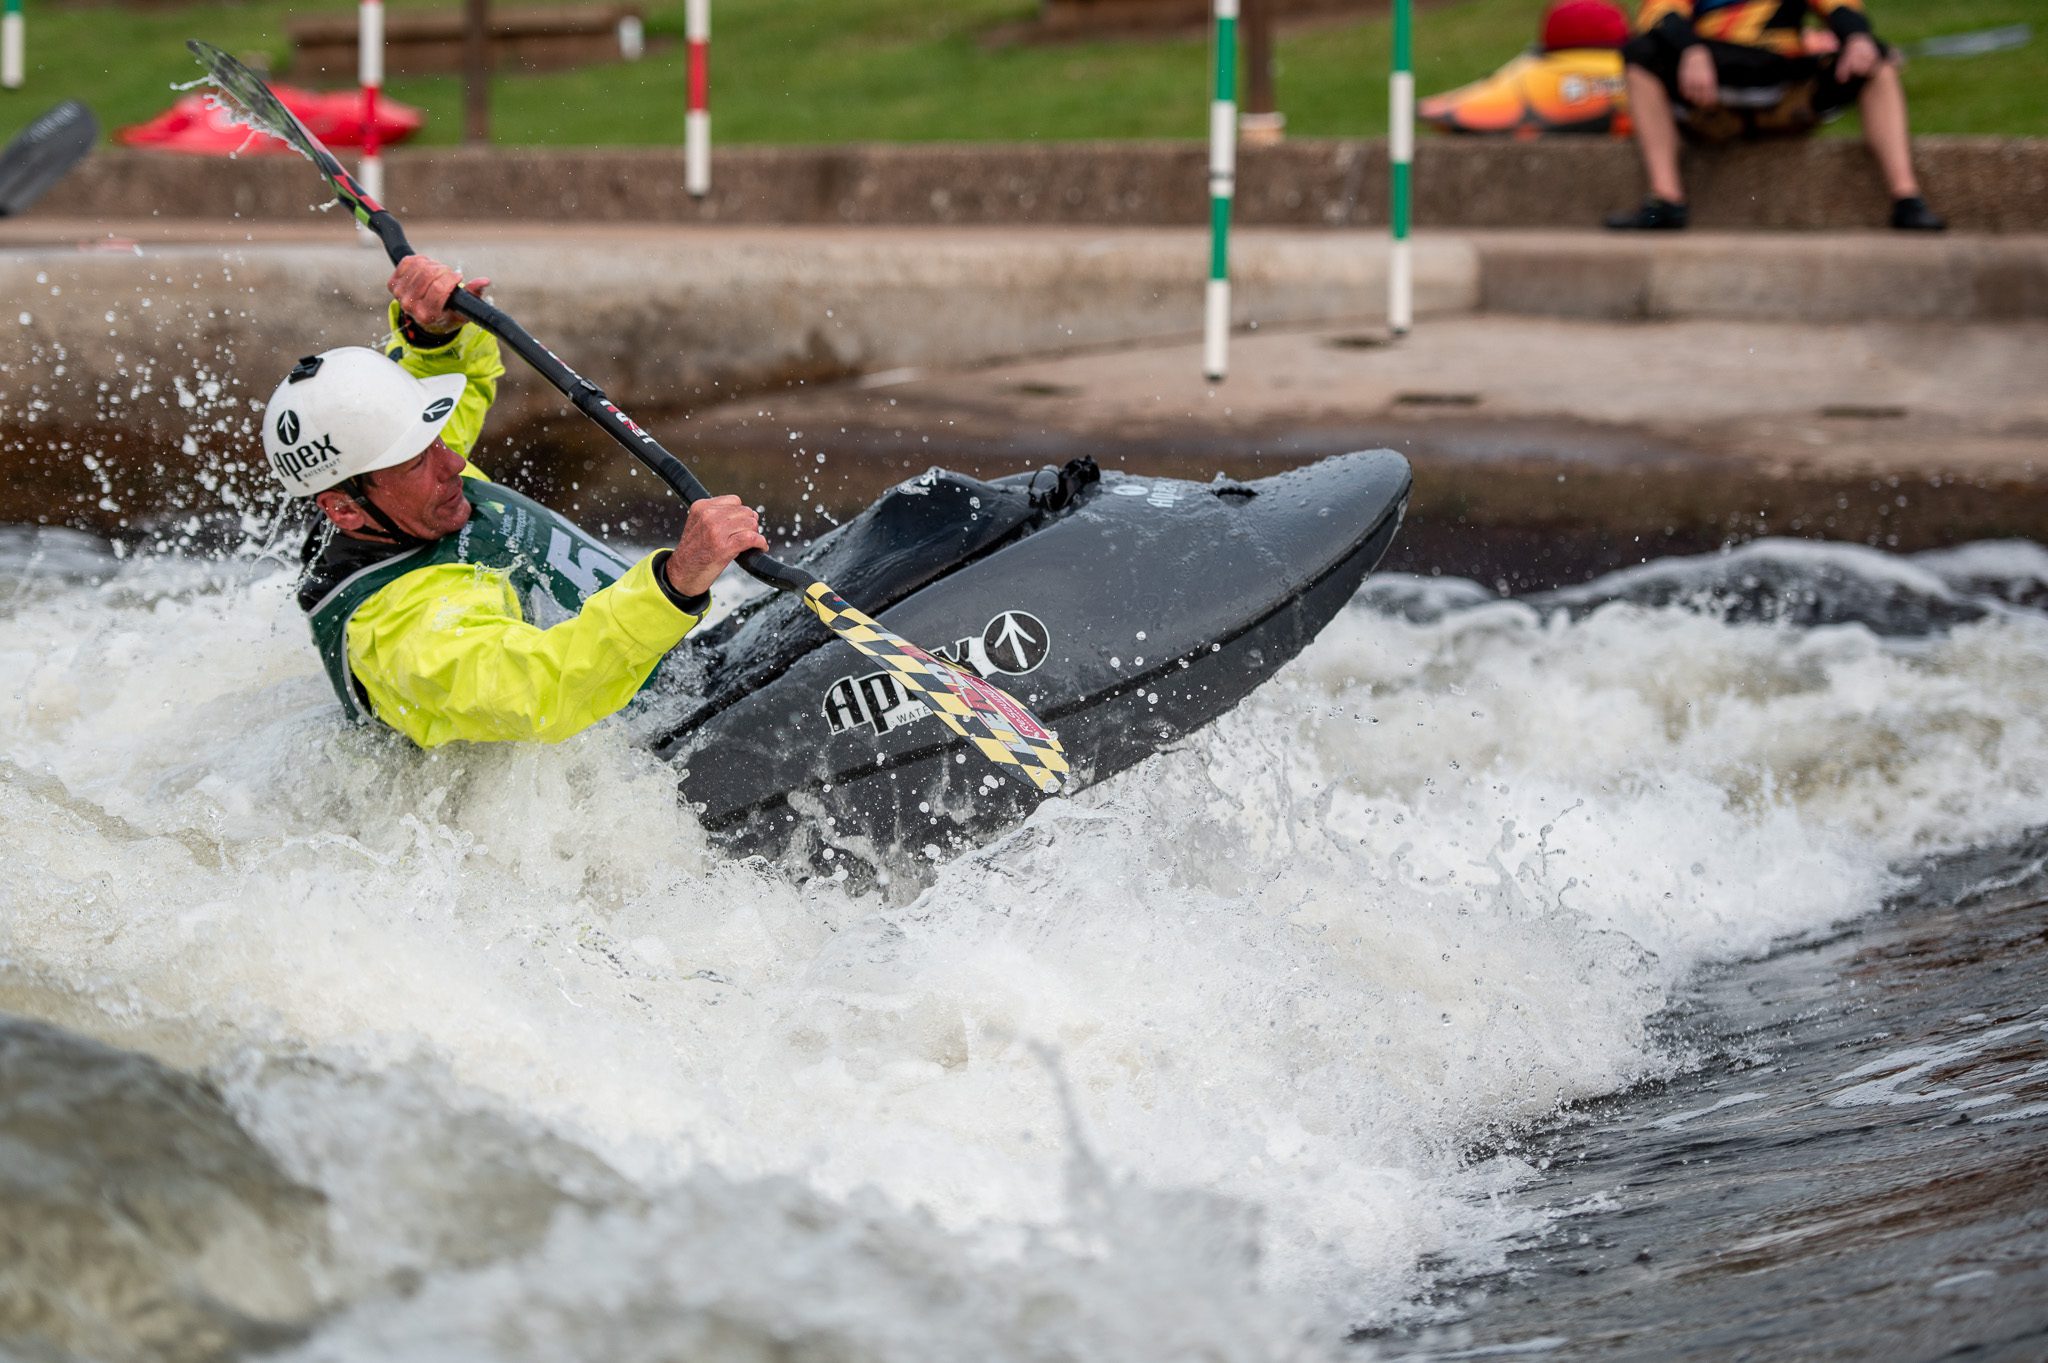 2022 World Freestyle Kayak Championships 10 days until the Preliminary